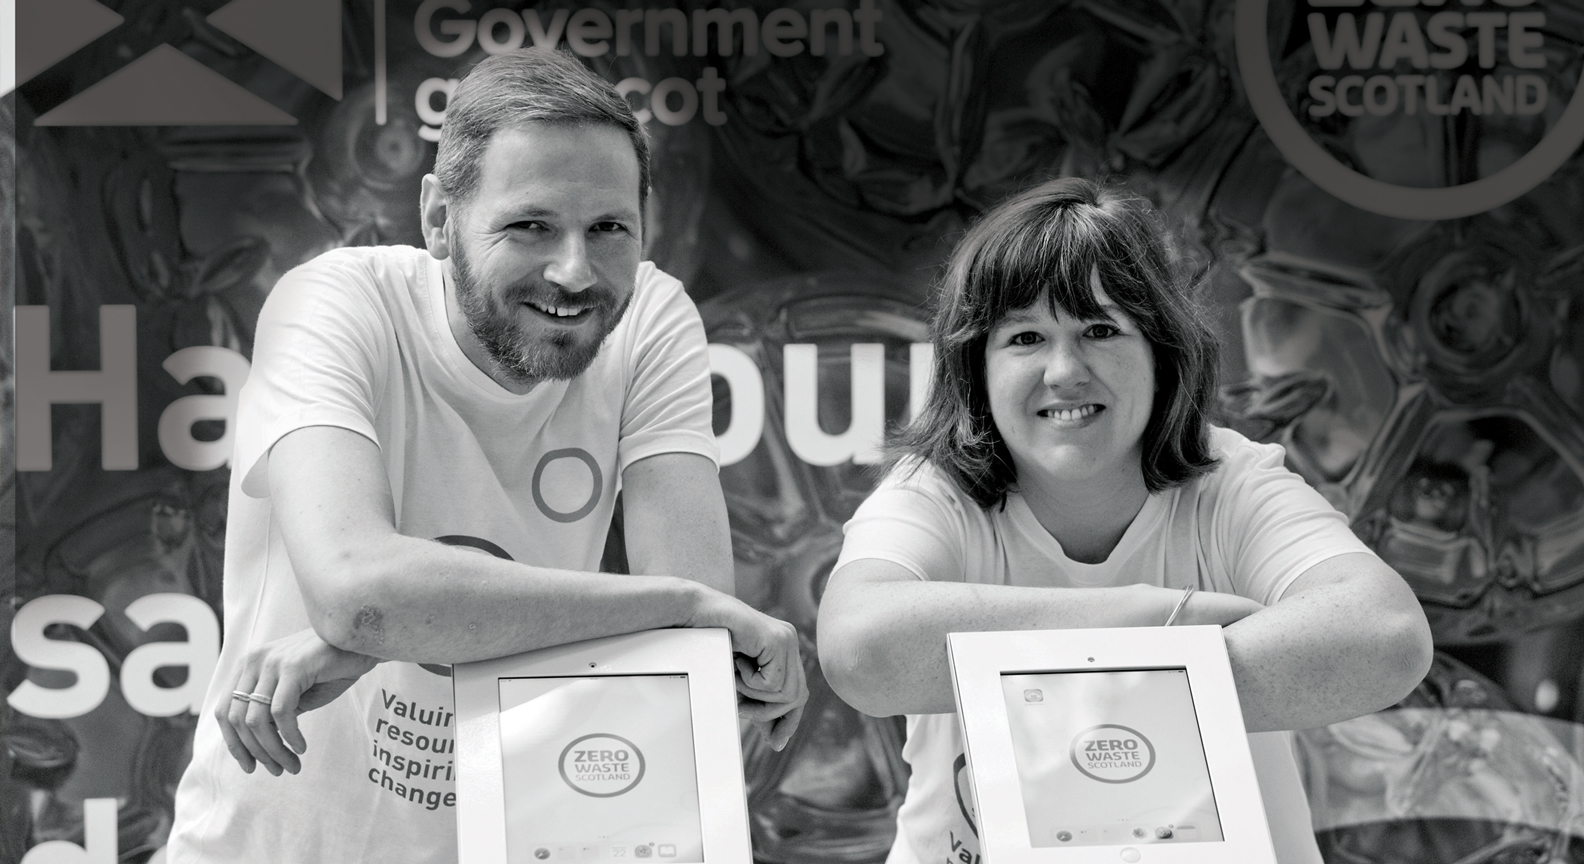 Two Zero Waste Scotland colleagues standing in front of tablet devices